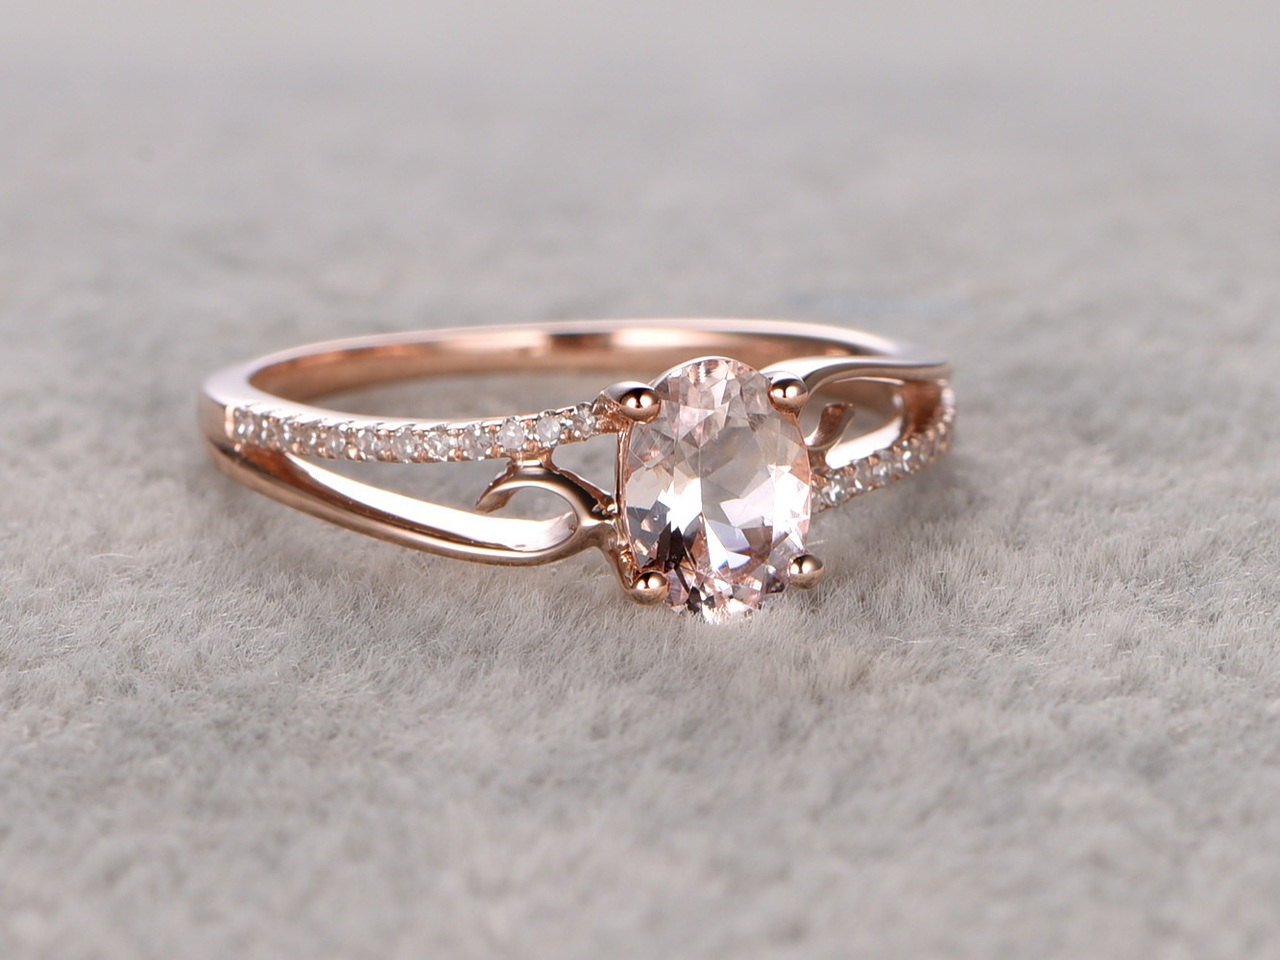 Moti Ferder on Choosing the Right Cut and Shape for Your Engagement Ring